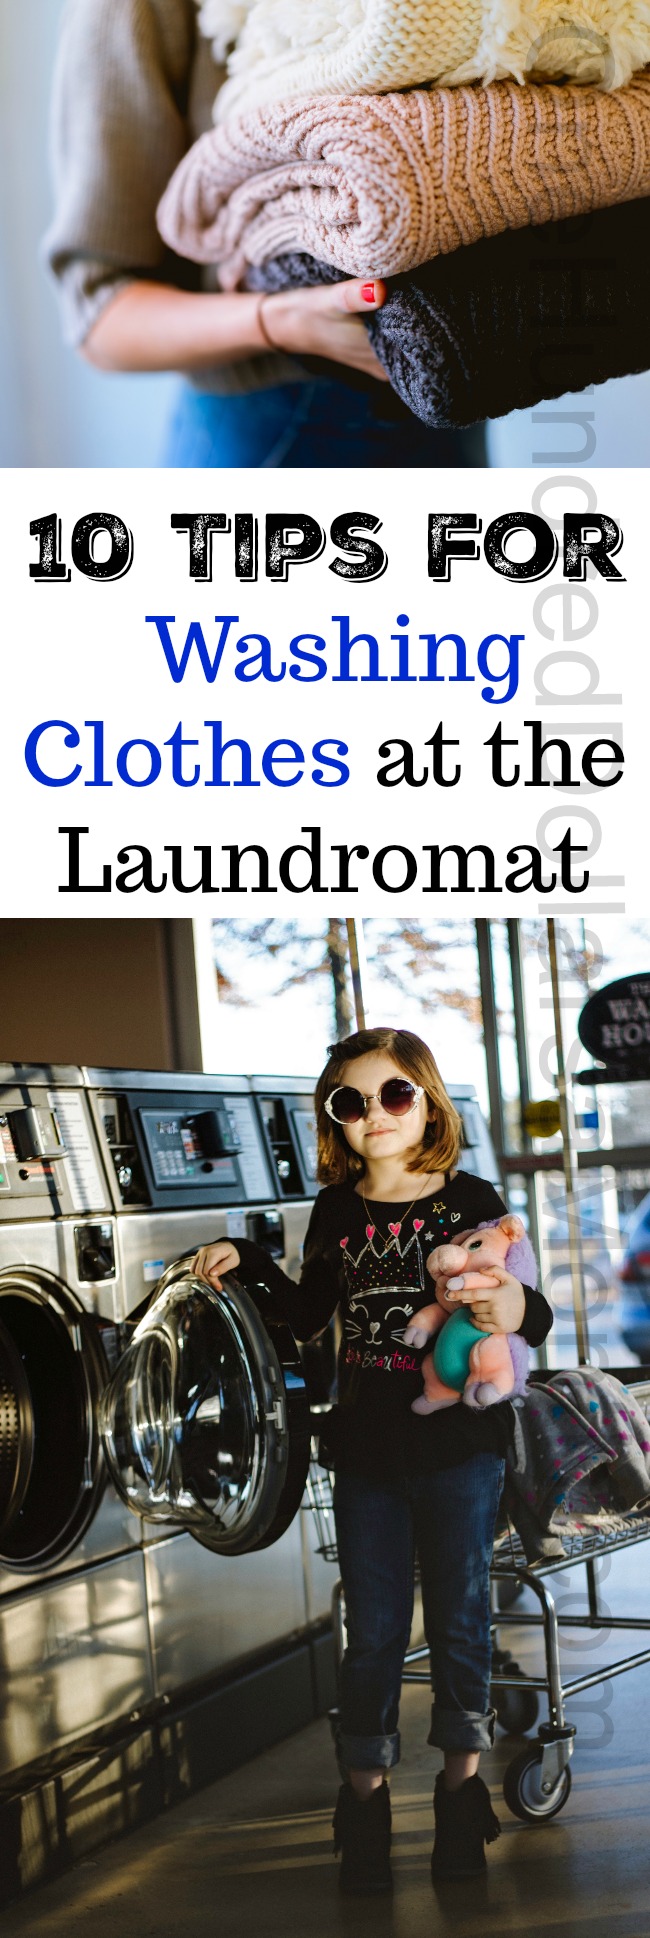 10 Tips for Washing Clothes at the Laundromat